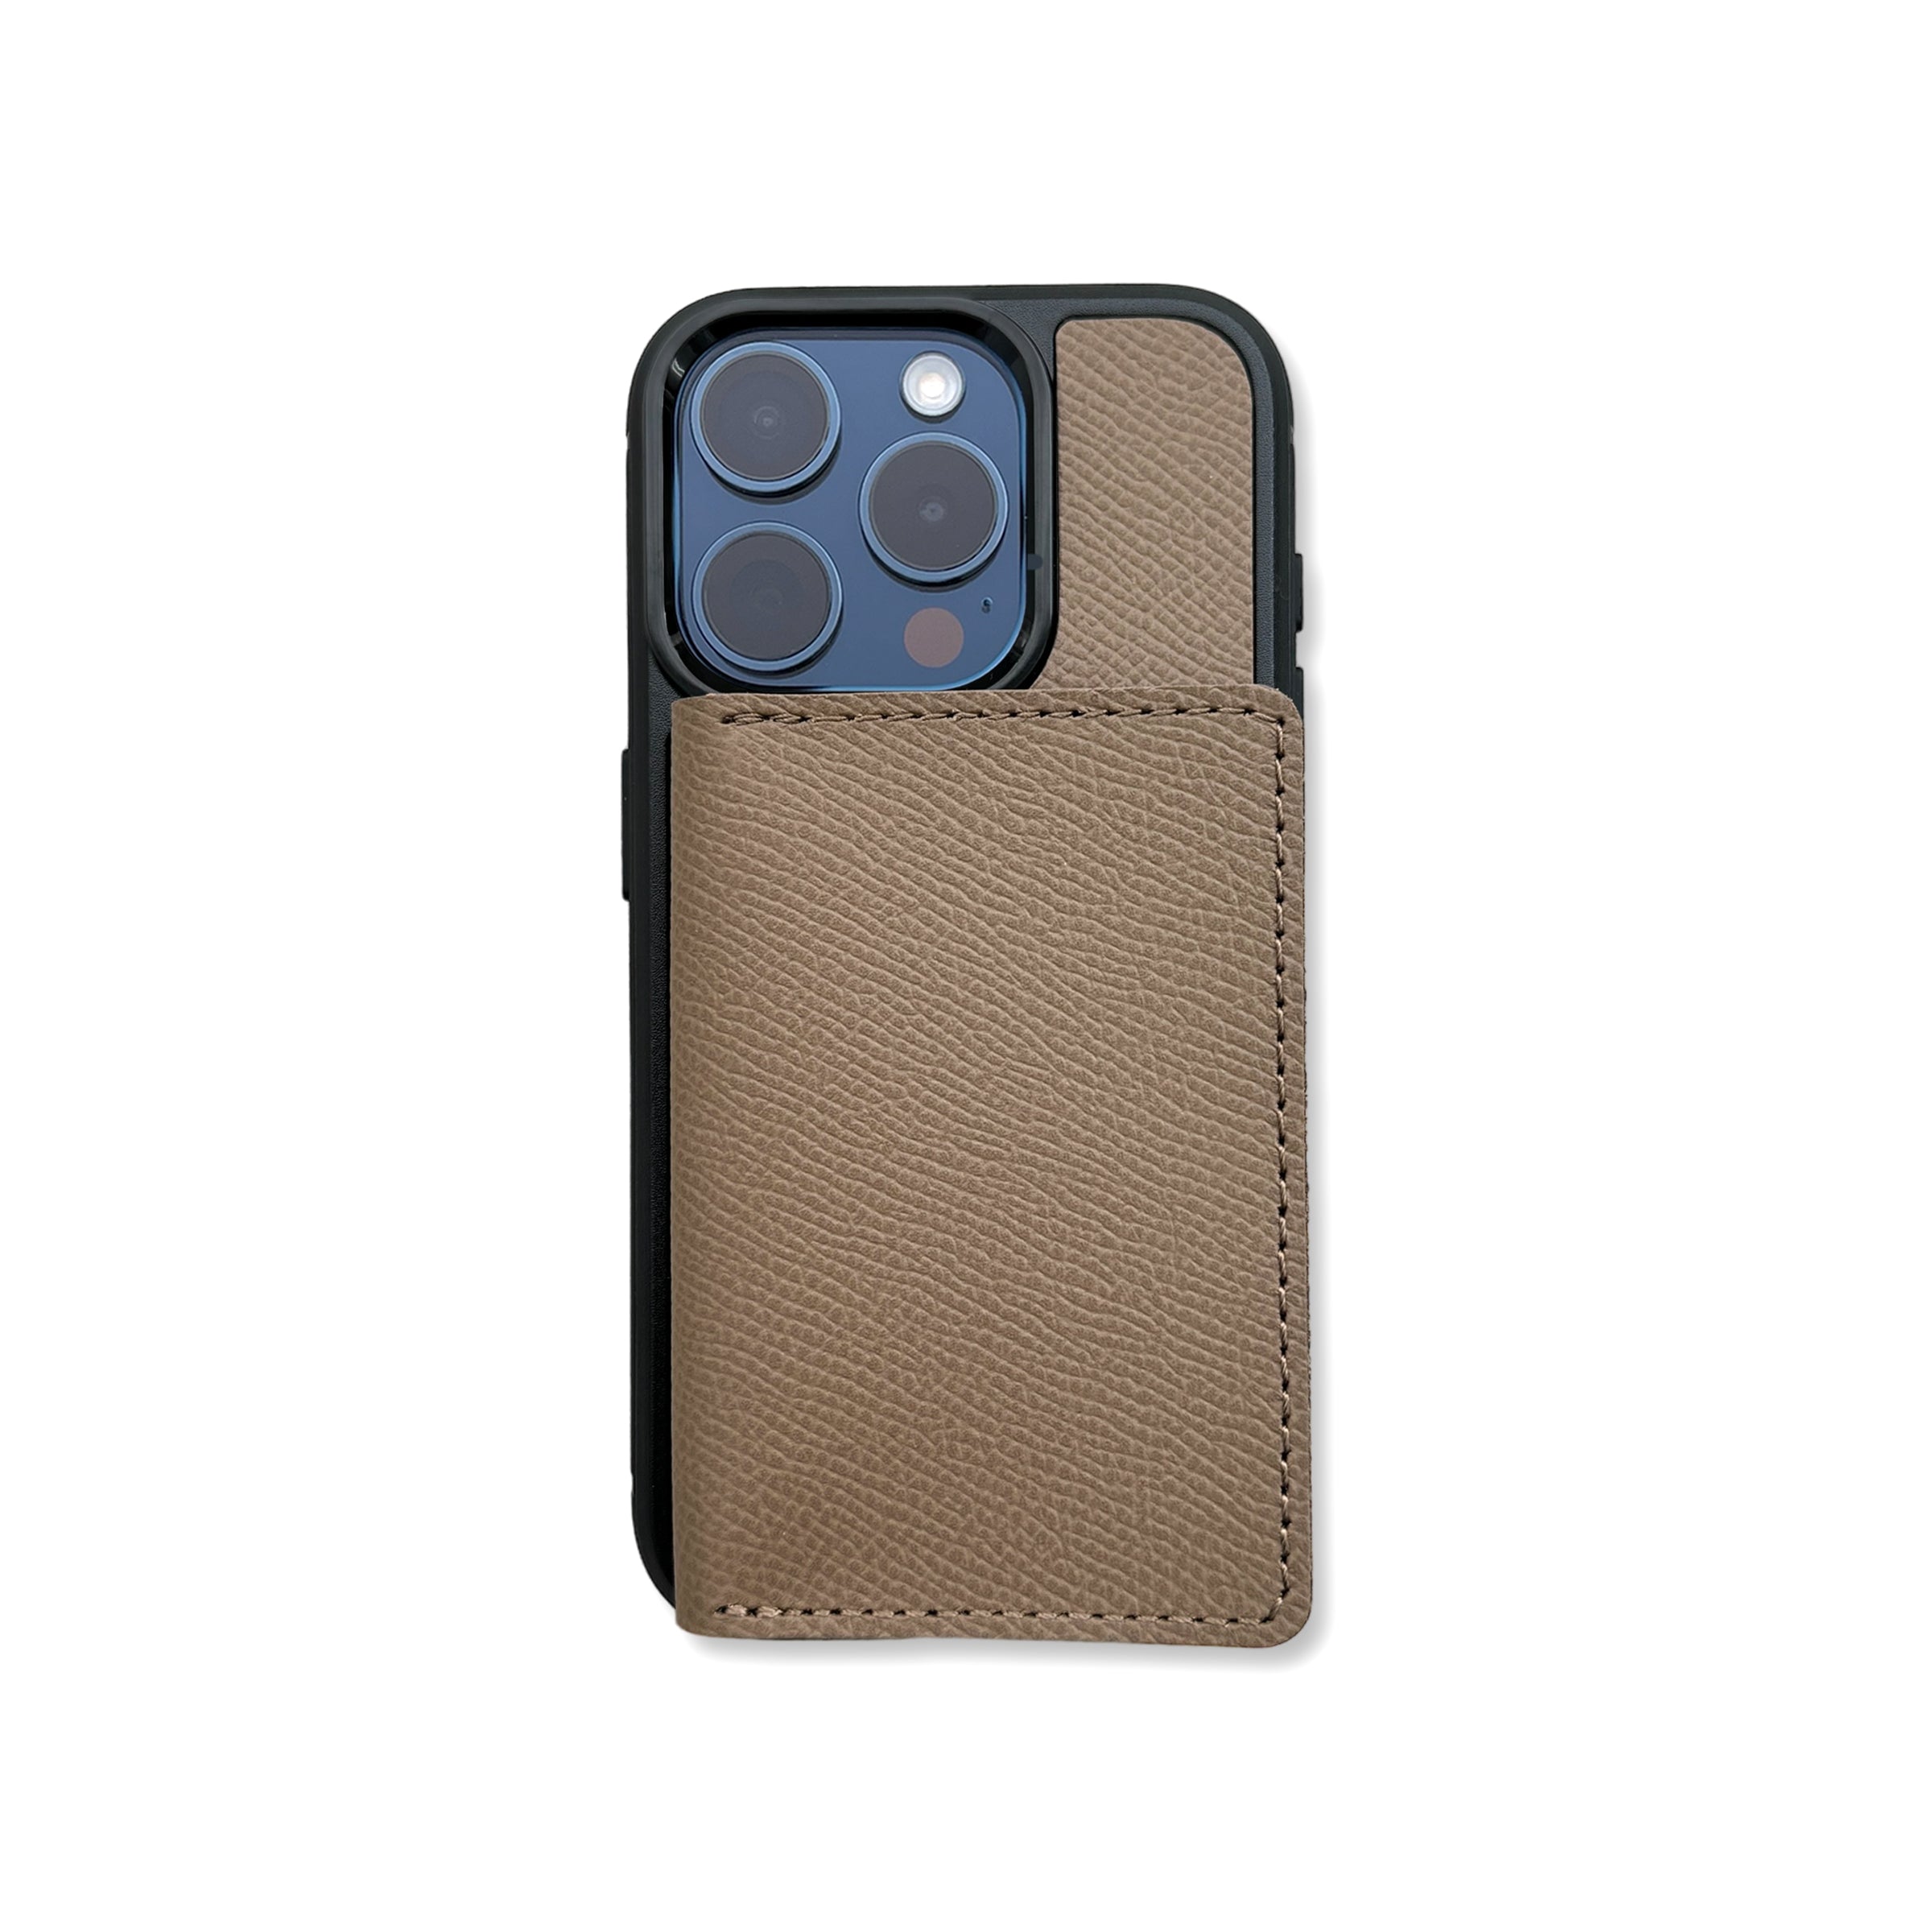 Motto Noblessa iPhone case and wallet